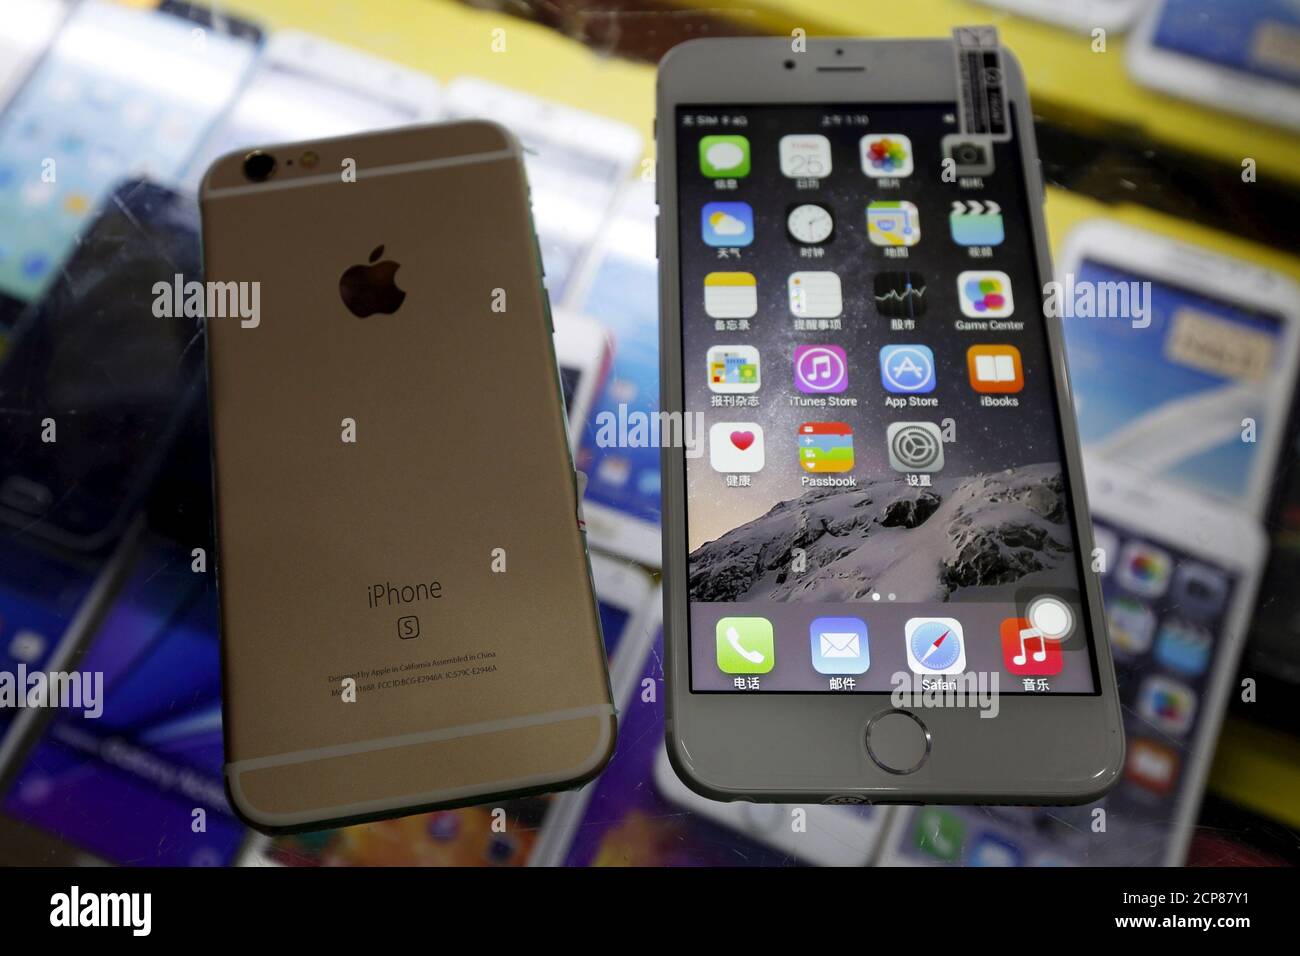 Vervagen Fotoelektrisch Inloggegevens A fake Apple iPhone 6s (L), which sells at RMB 580 ($91) is seen beside a  fake iPhone 6 Plus, which sells at RMB 630 ($99), both running the Android  operating system